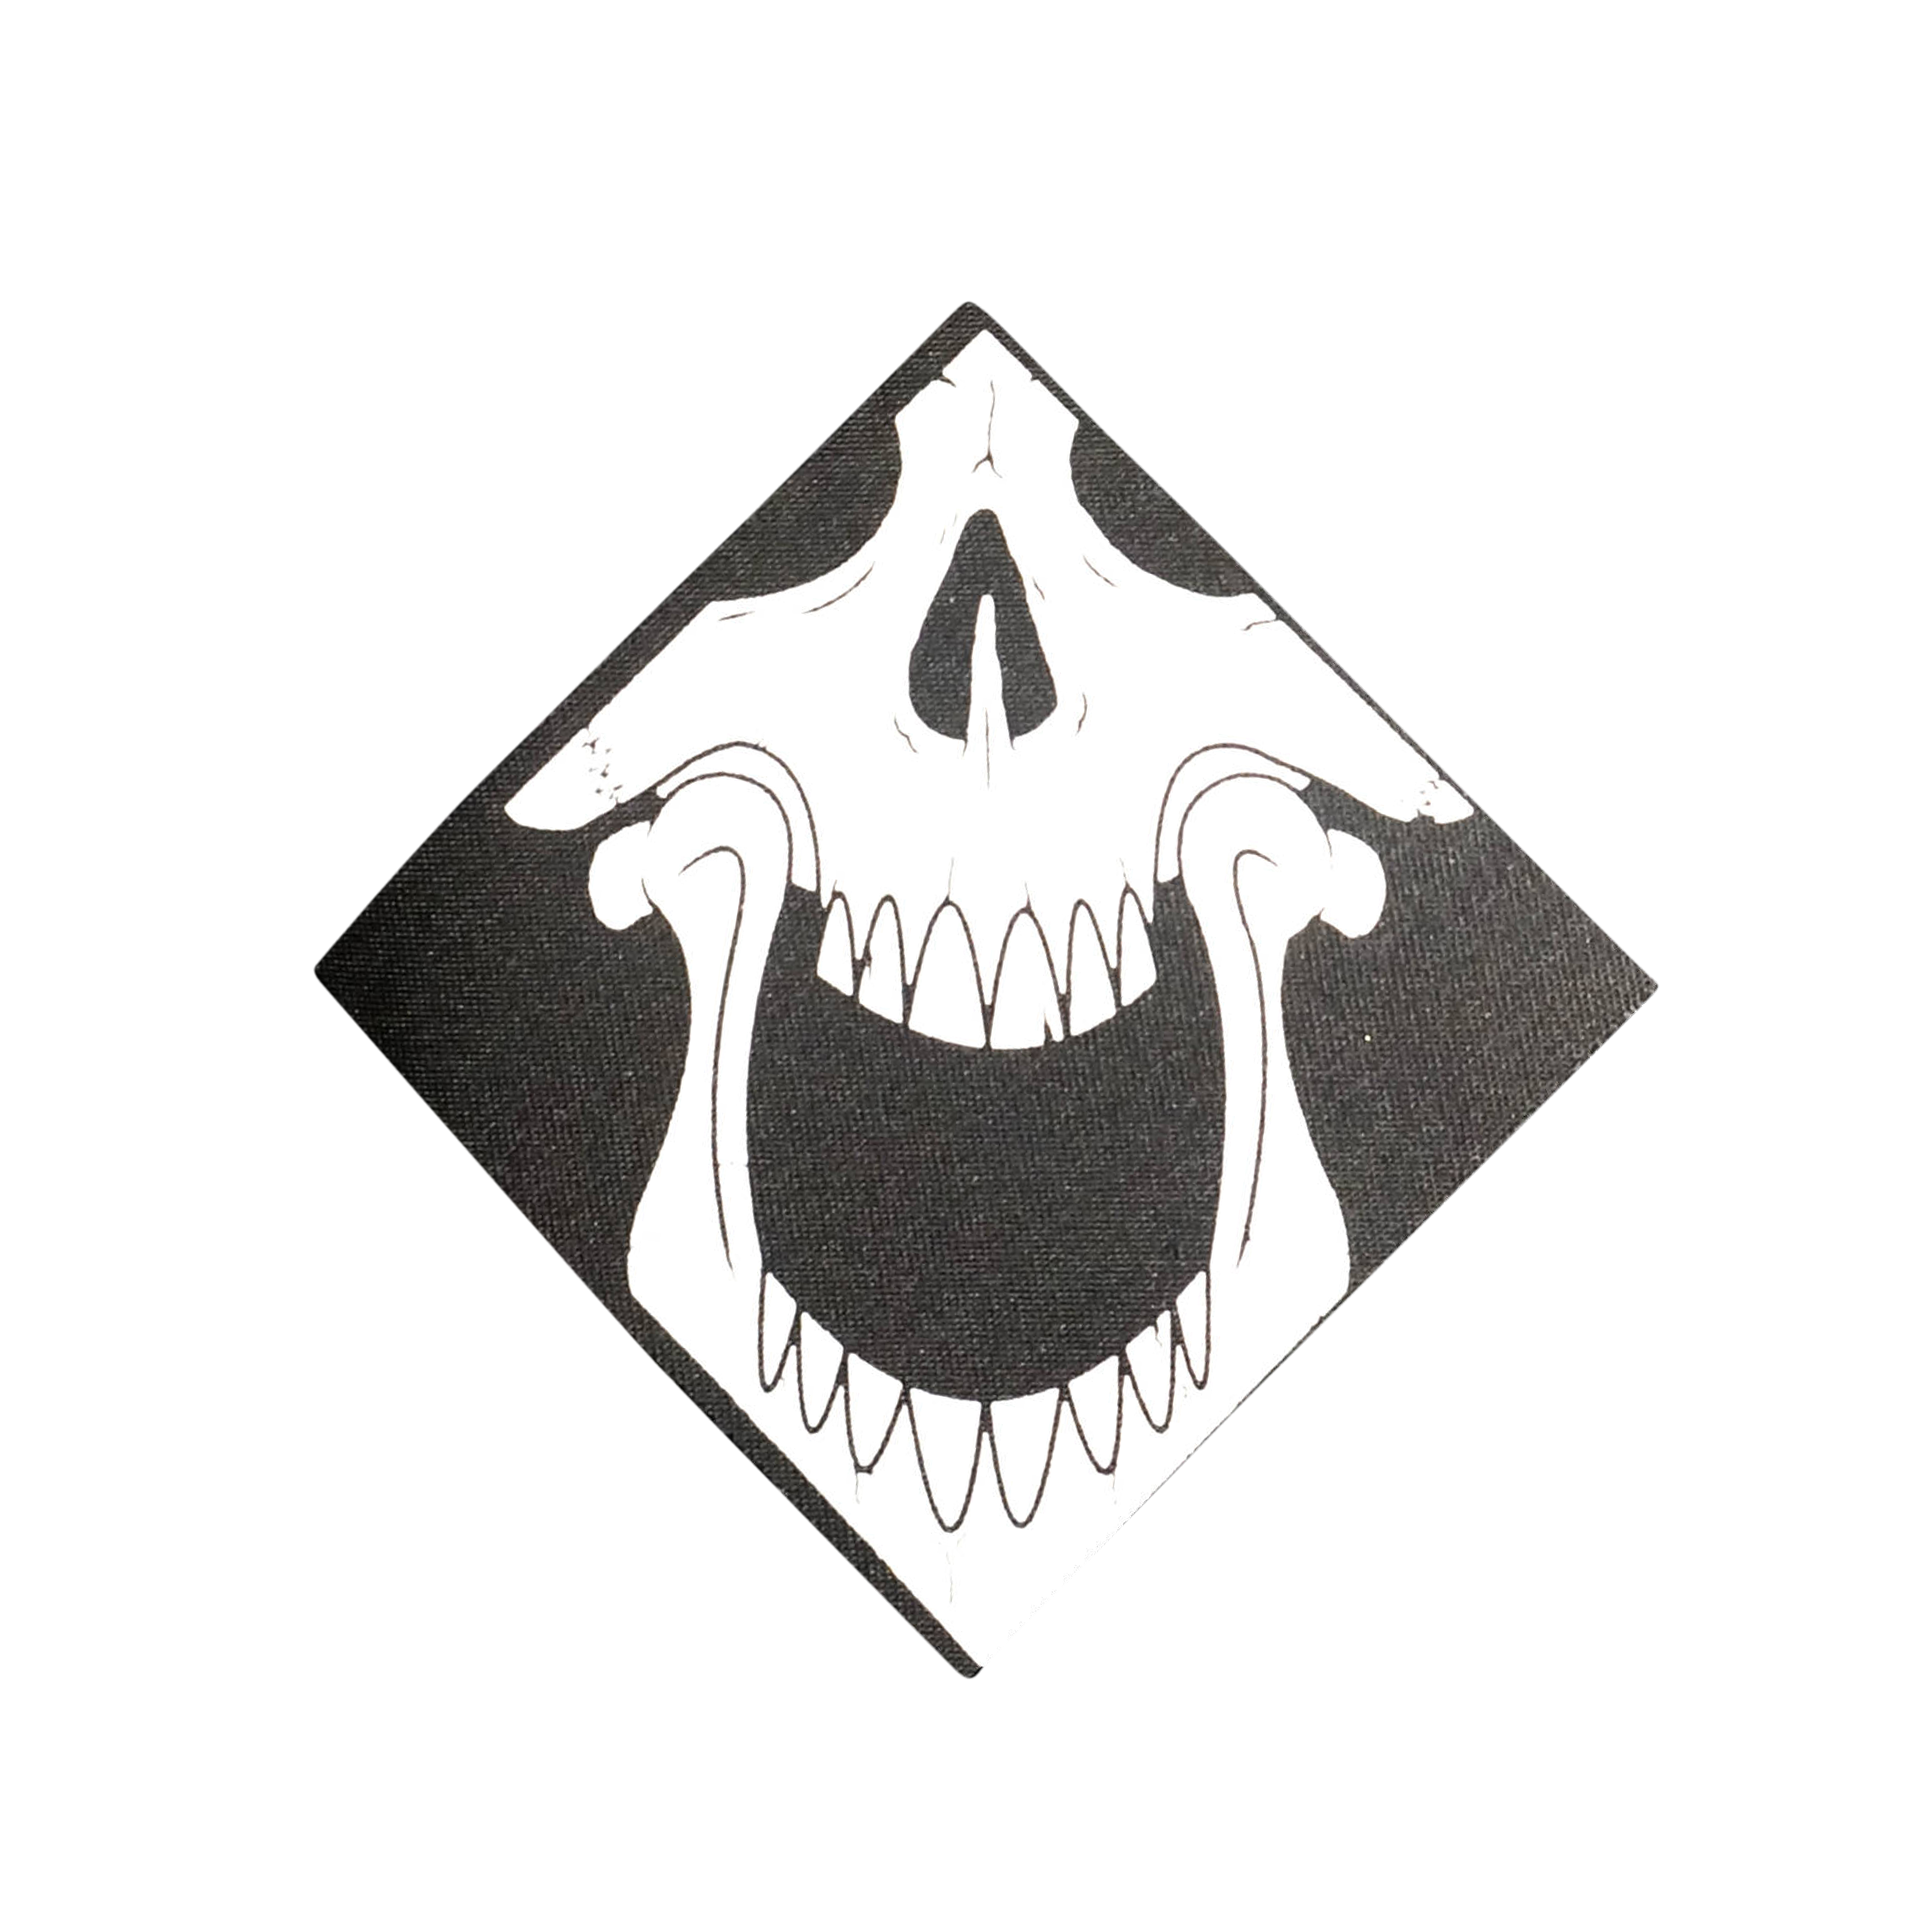 Screaming Skull Patch